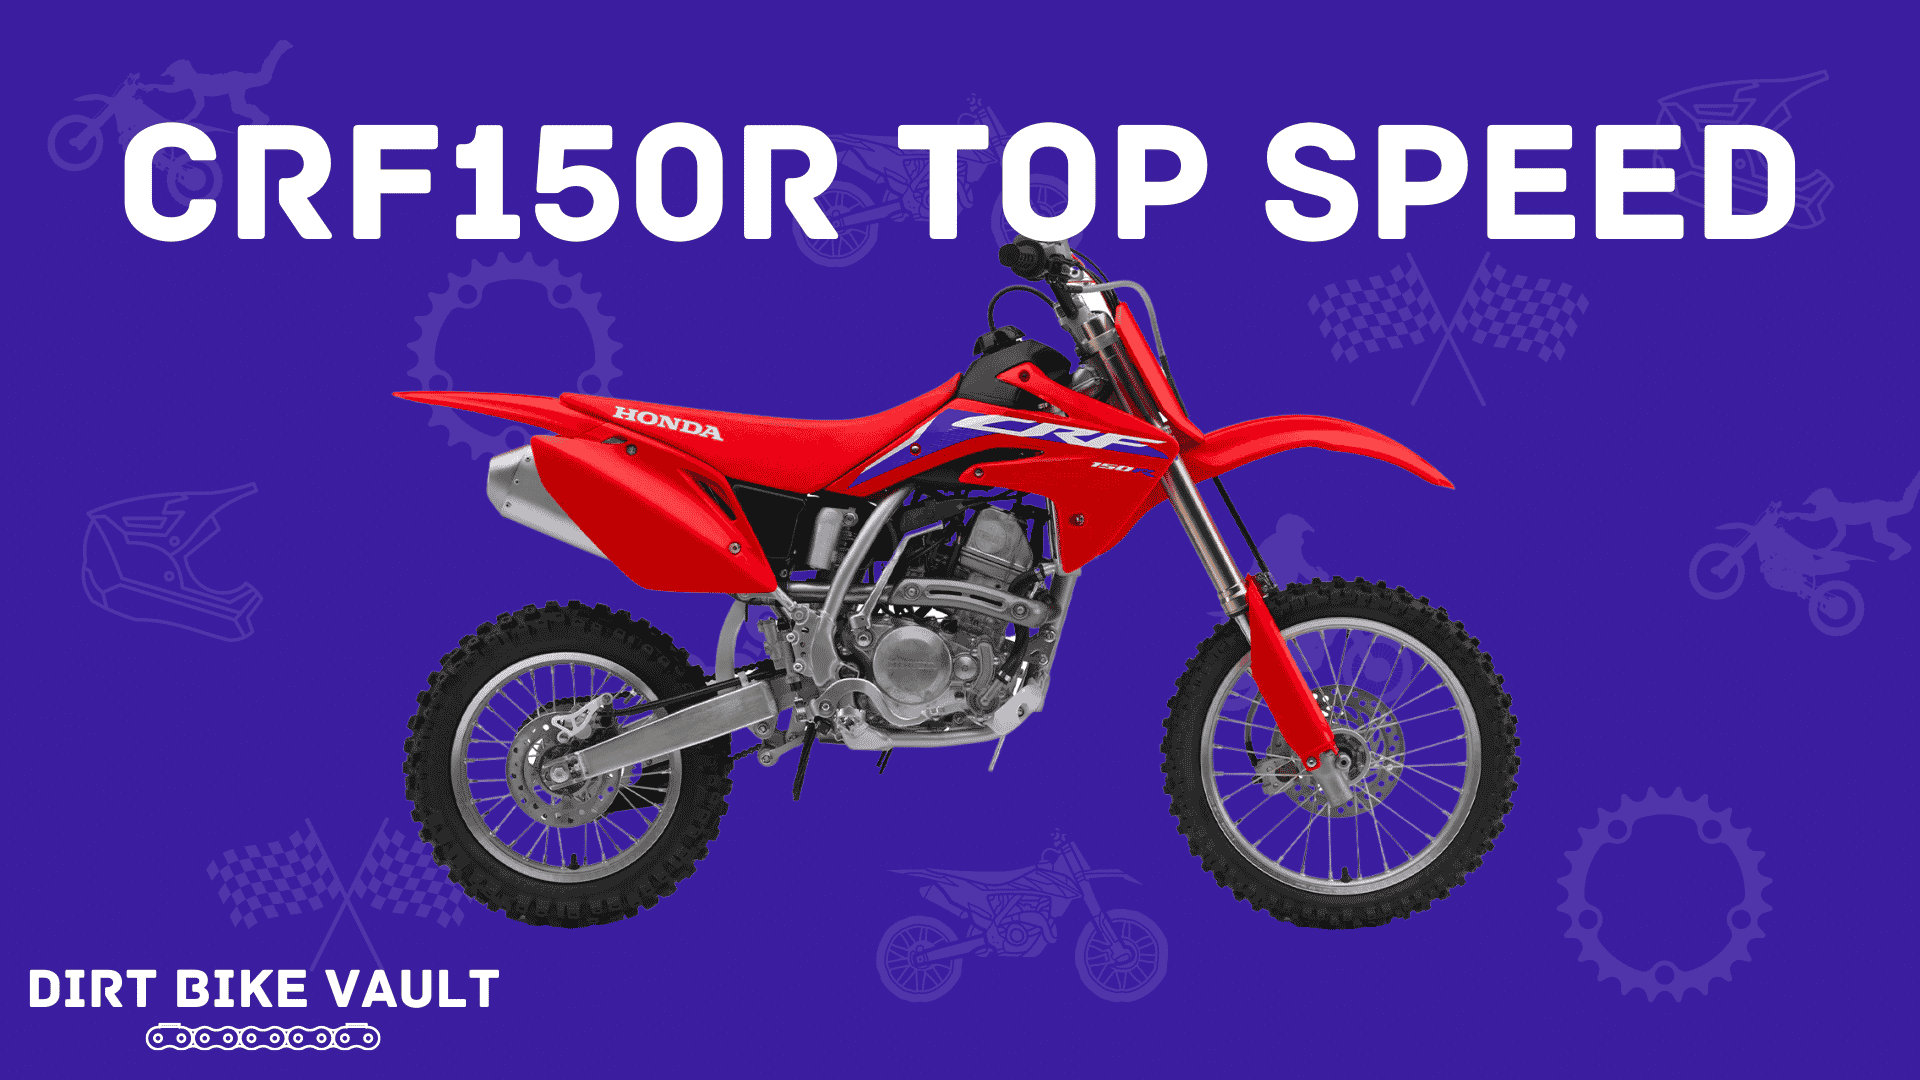 CRF150R top speed in white text on dark blue background with image of CRF150R dirt bike